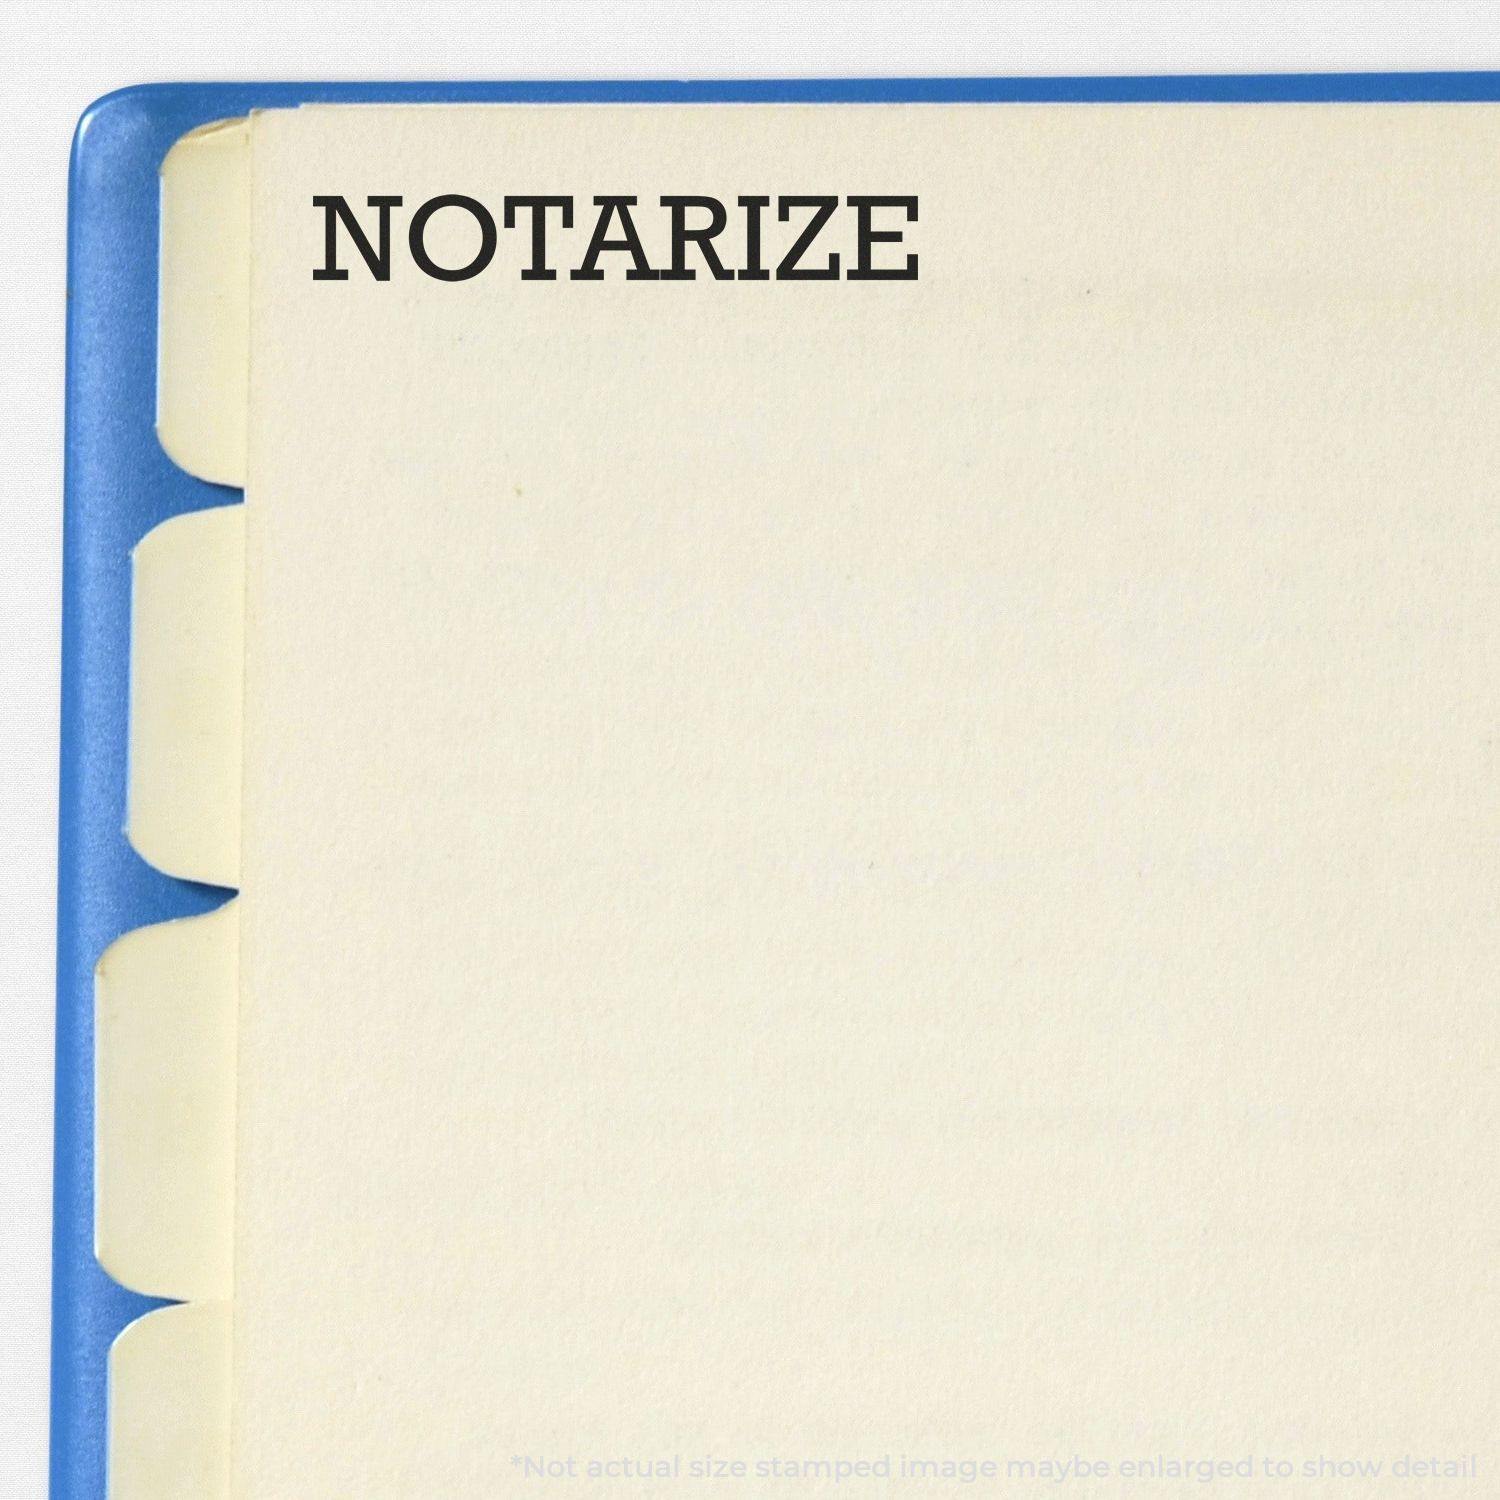 A stock office rubber stamp with a stamped image showing how the text "NOTARIZE" in a large font is displayed after stamping.